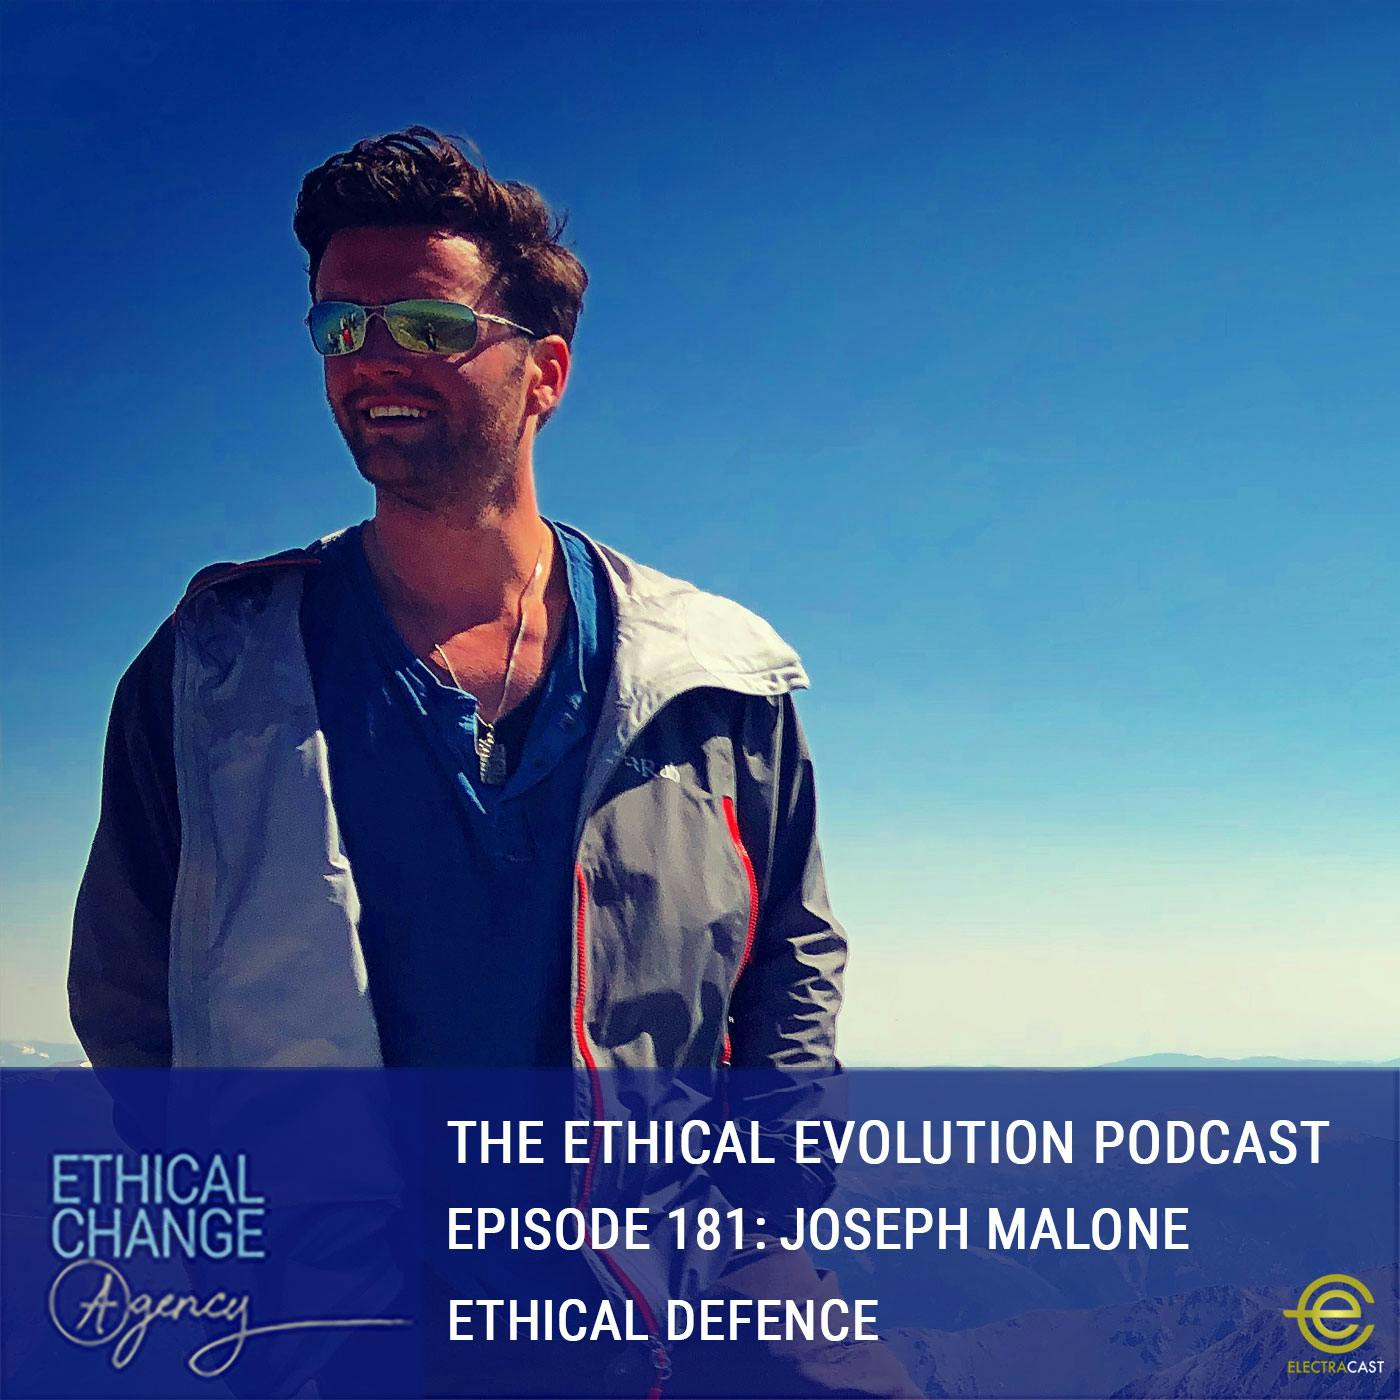 Ethical Defence with Joseph Malone